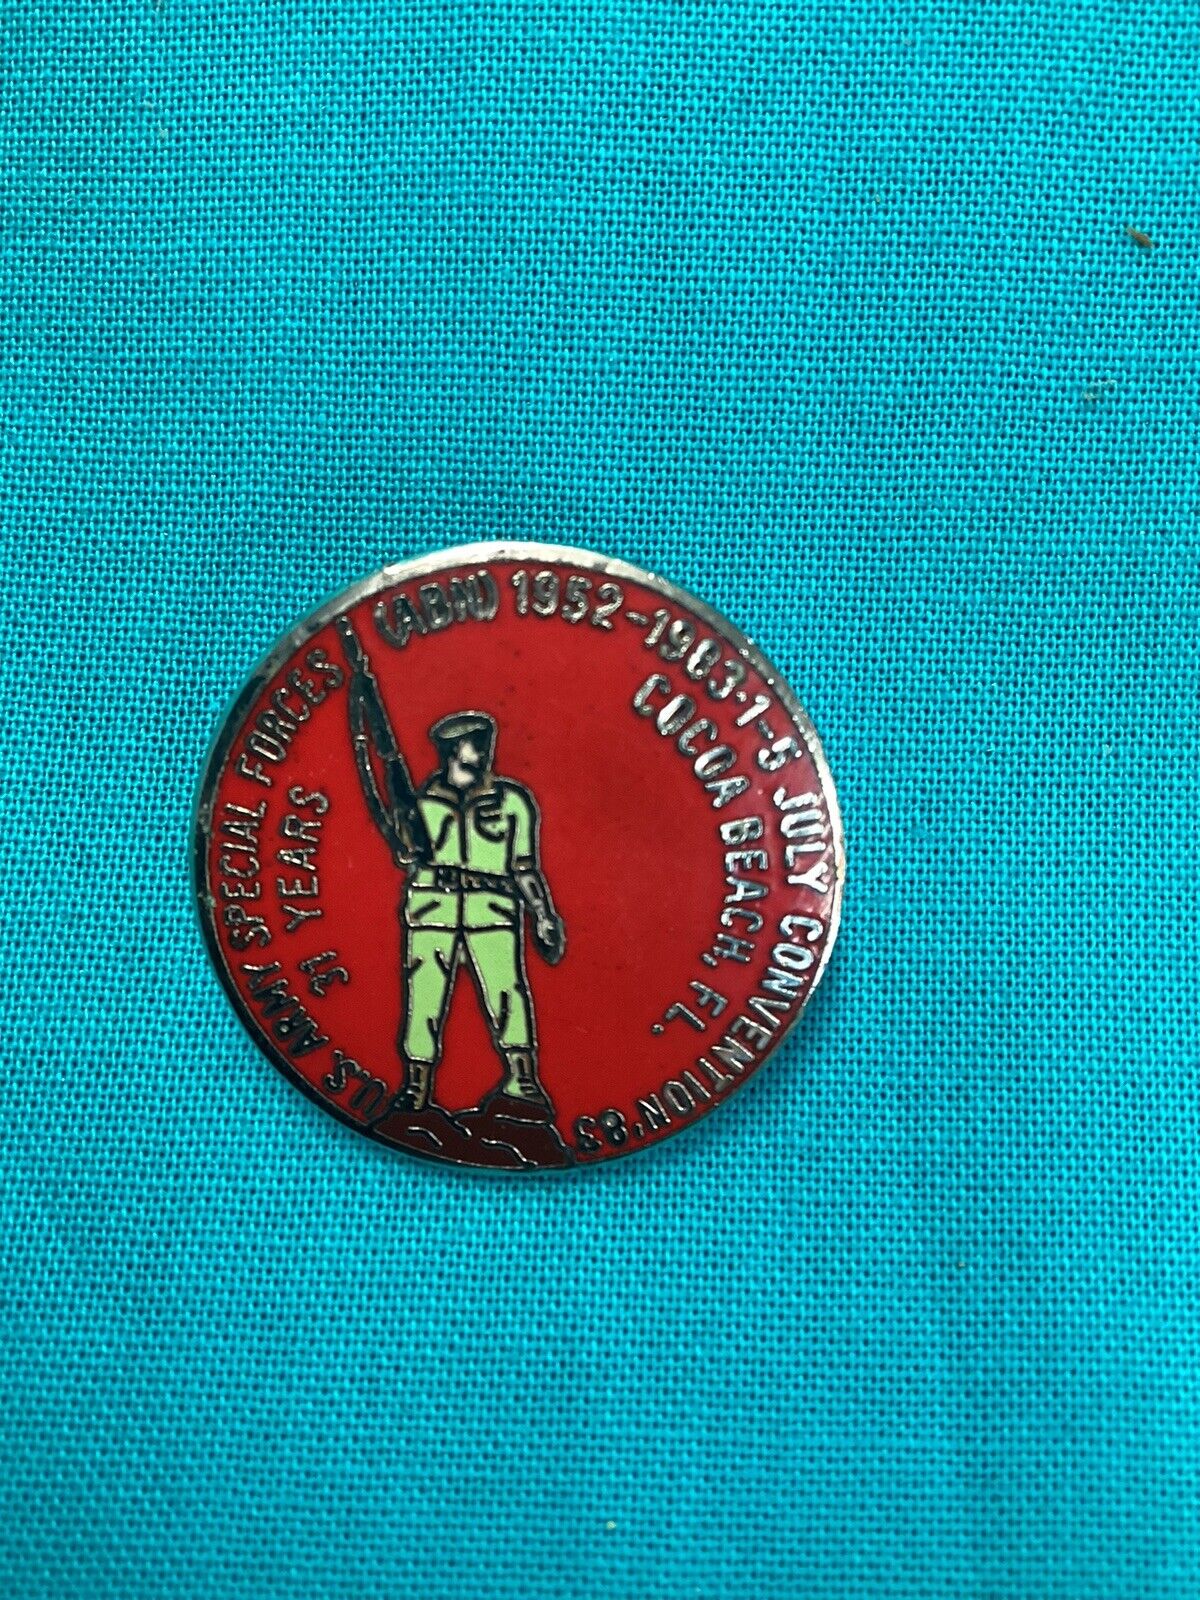 U.S. Army Special Forces ARN Pin 1952-1983 Convention Cocoa Beach FL Pin